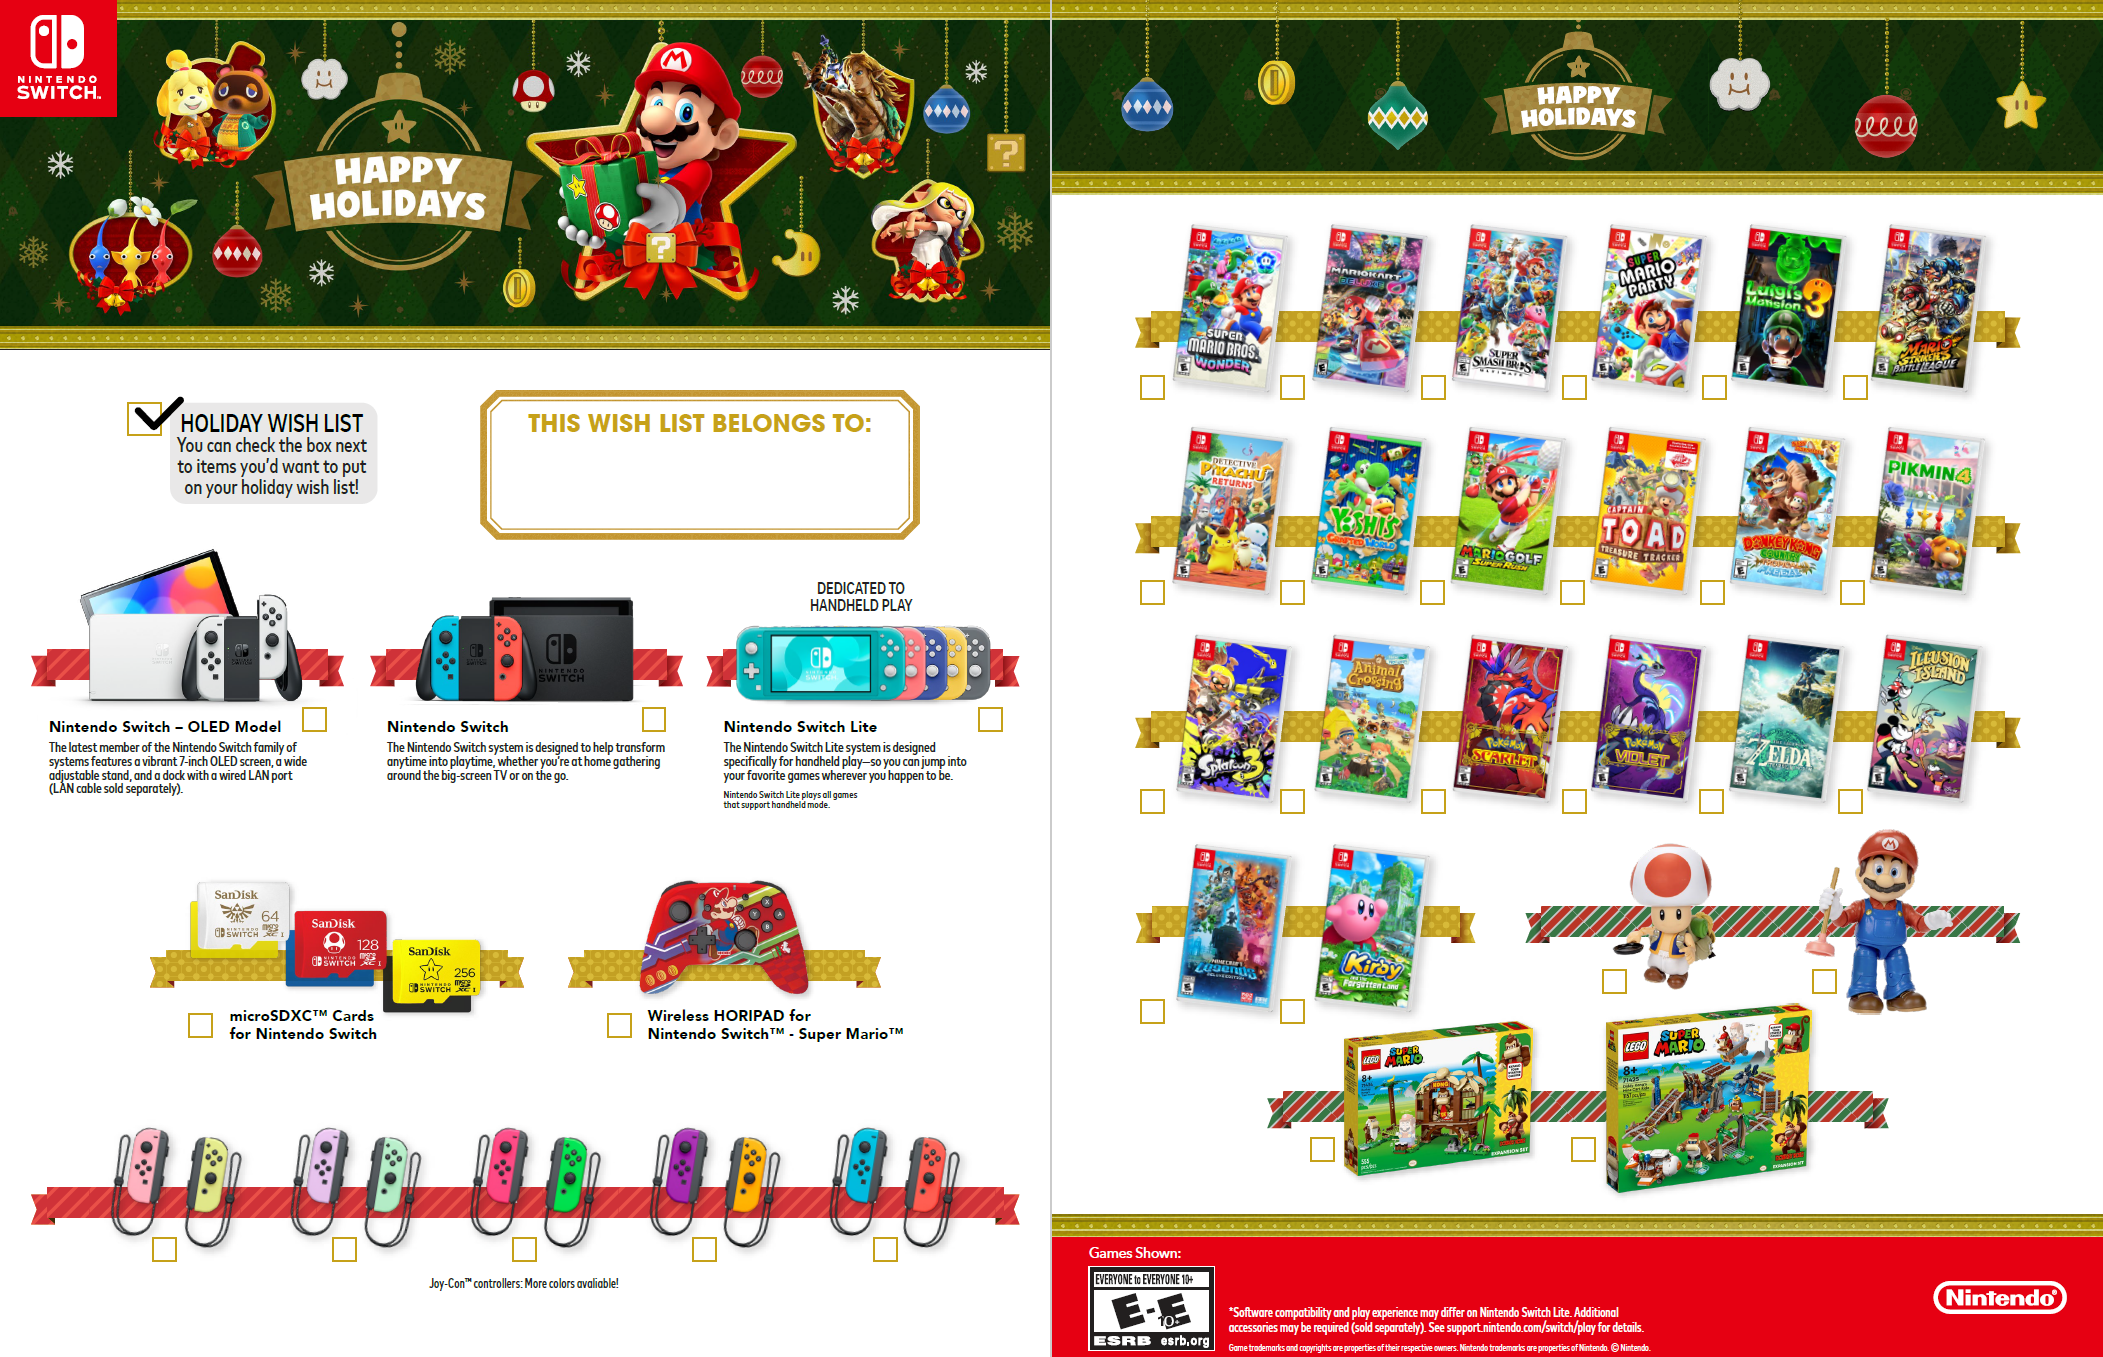 Check out these great, family-friendly gift options from Nintendo